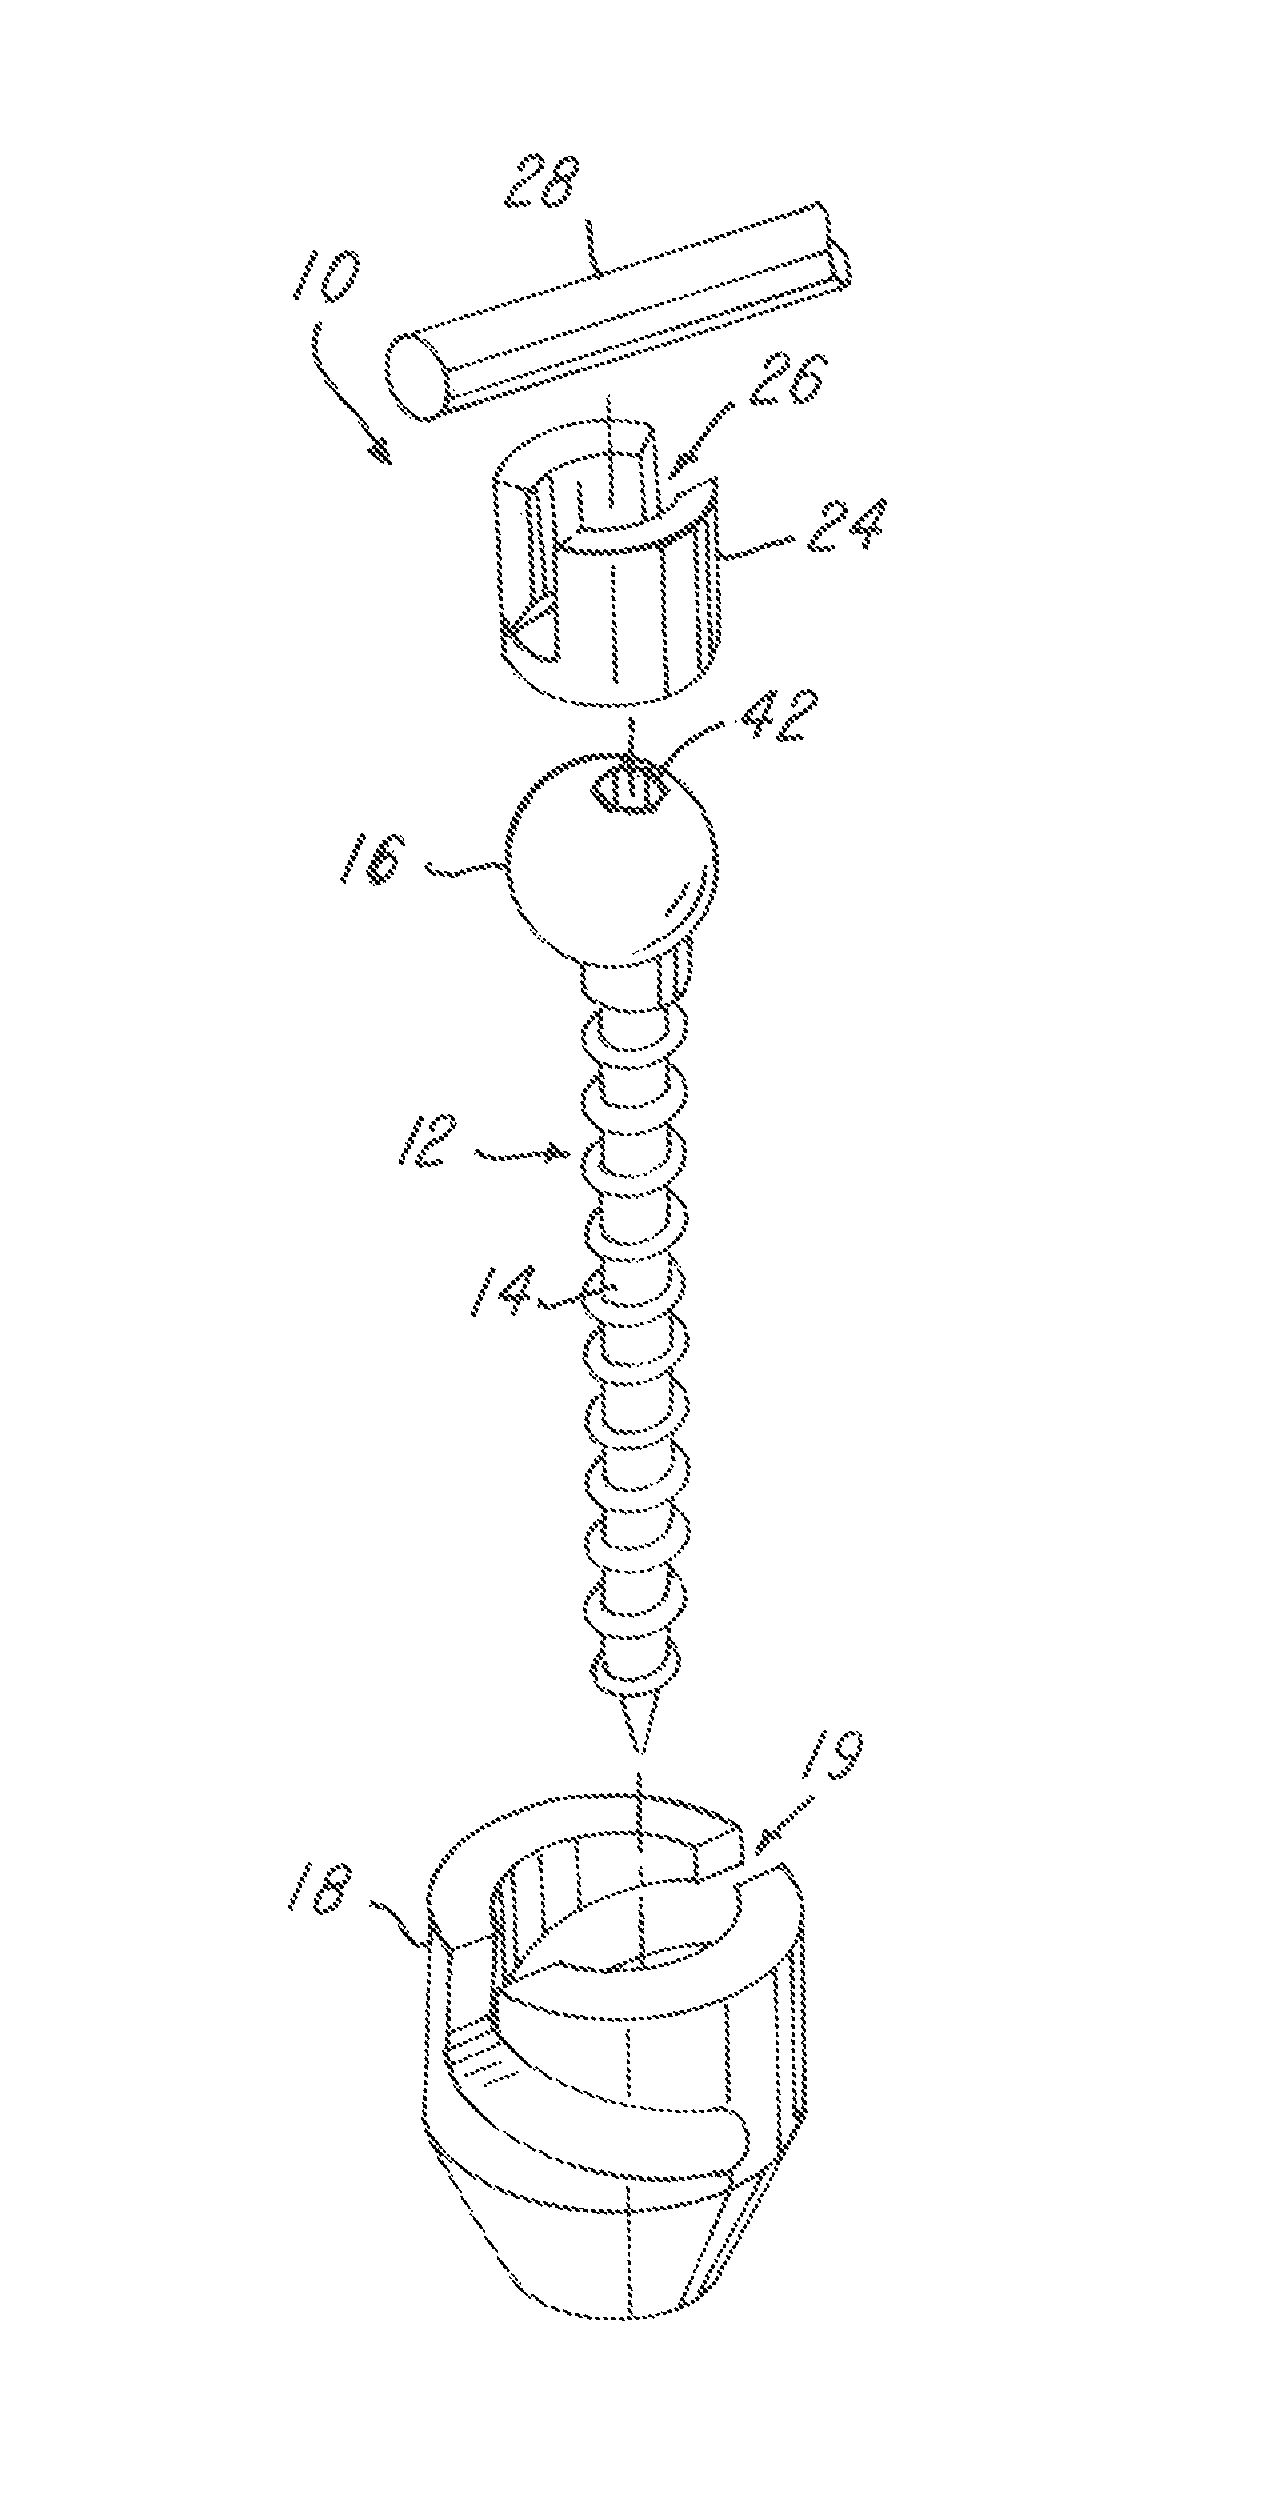 Offset multiaxial or polyaxial screw, system and assembly